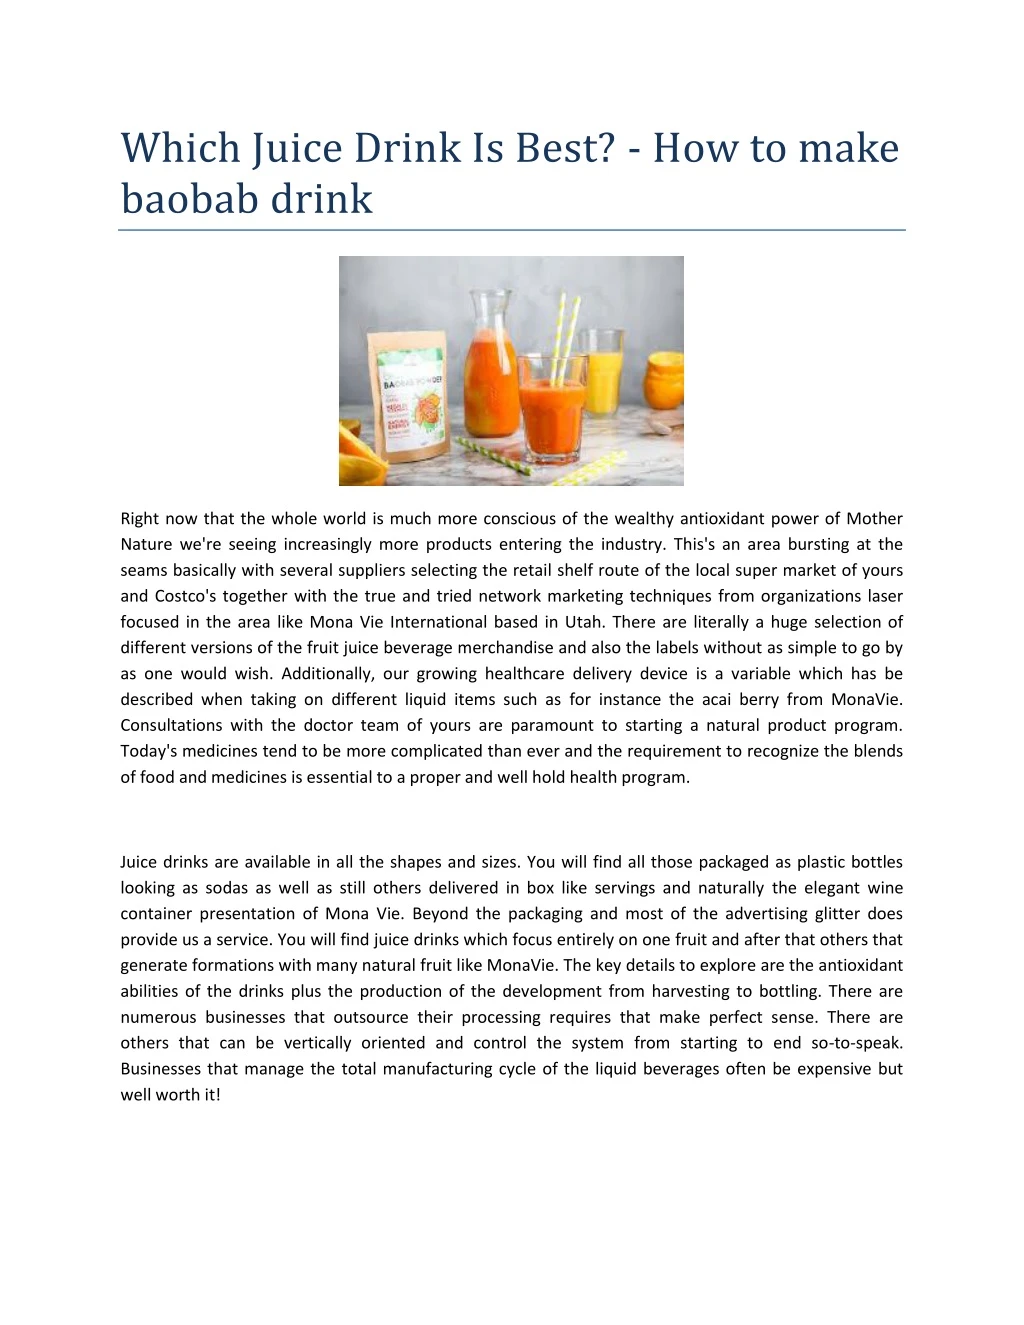 which juice drink is best how to make baobab drink